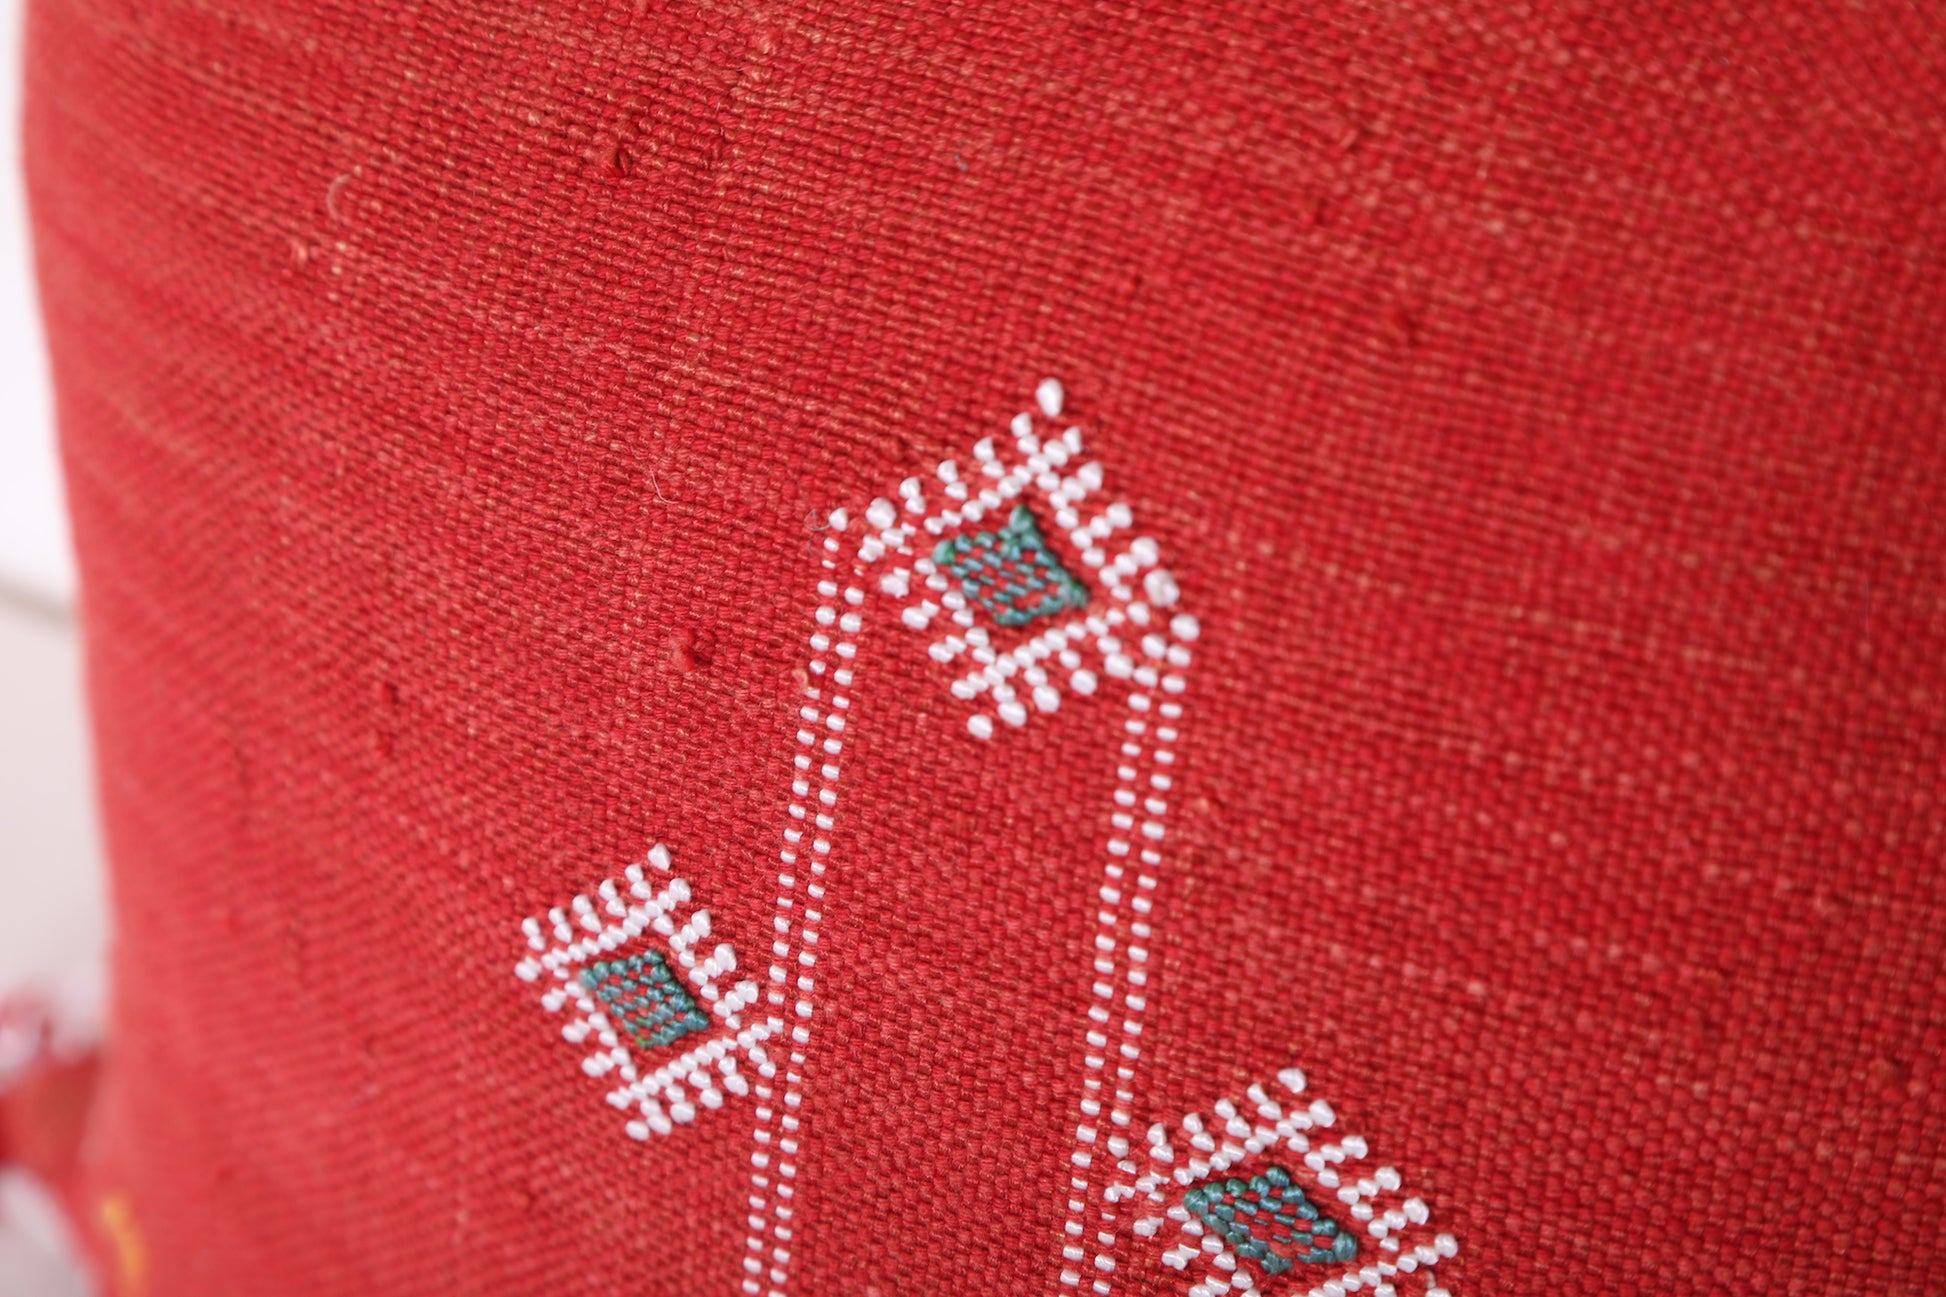 Red Moroccan Kilim Pillow 17.3 INCHES X 18.1 INCHES